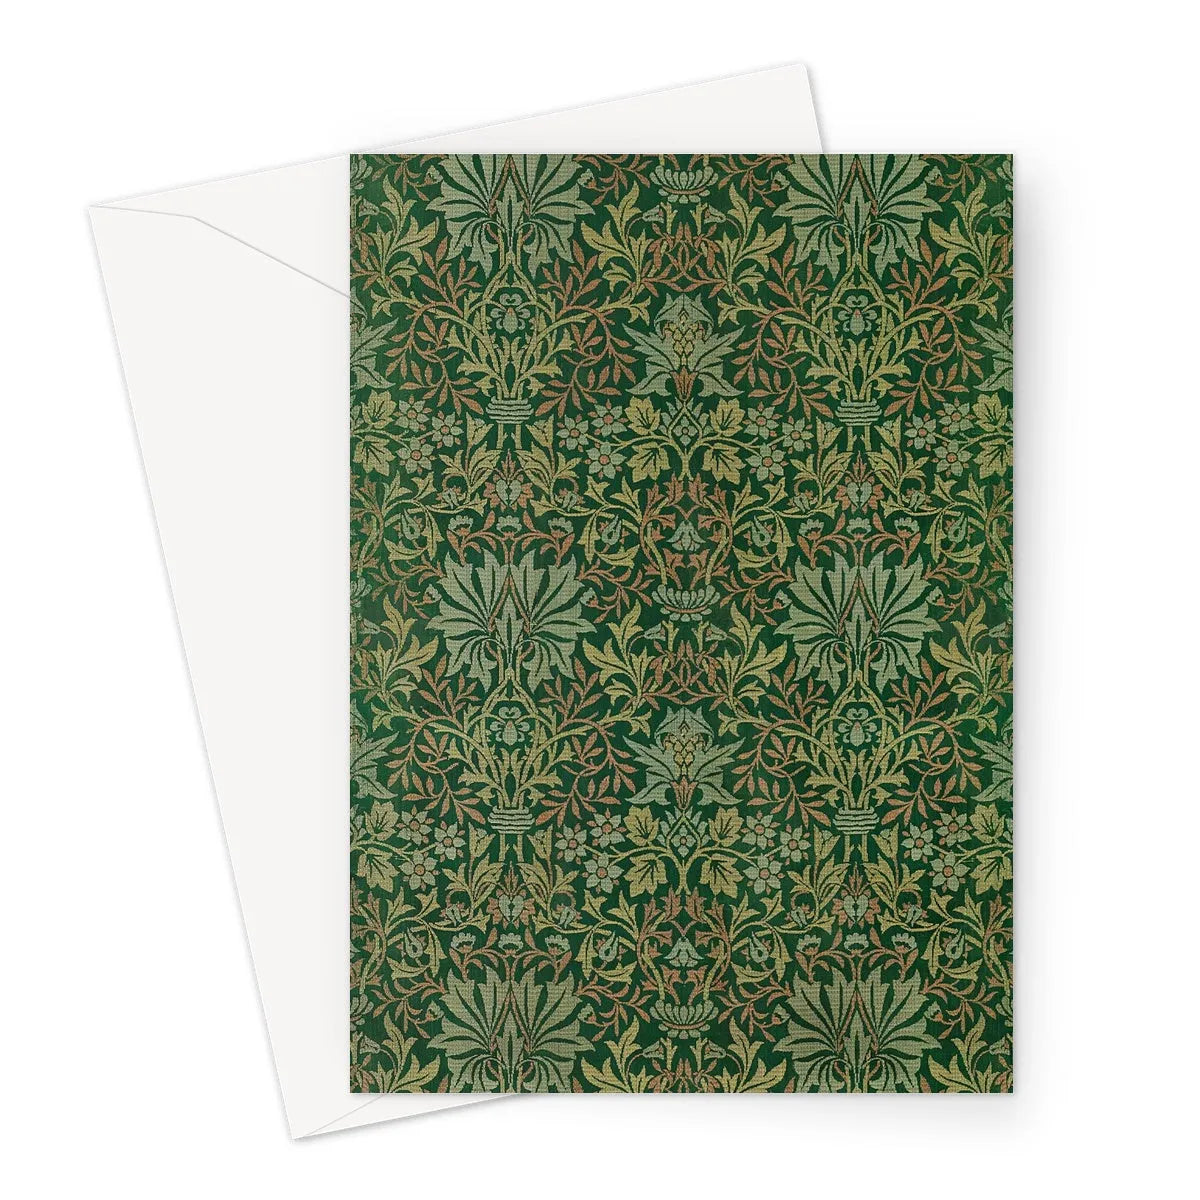 Flower Garden By William Morris Greeting Card - A5 Portrait / 10 Cards - Greeting & Note Cards - Aesthetic Art